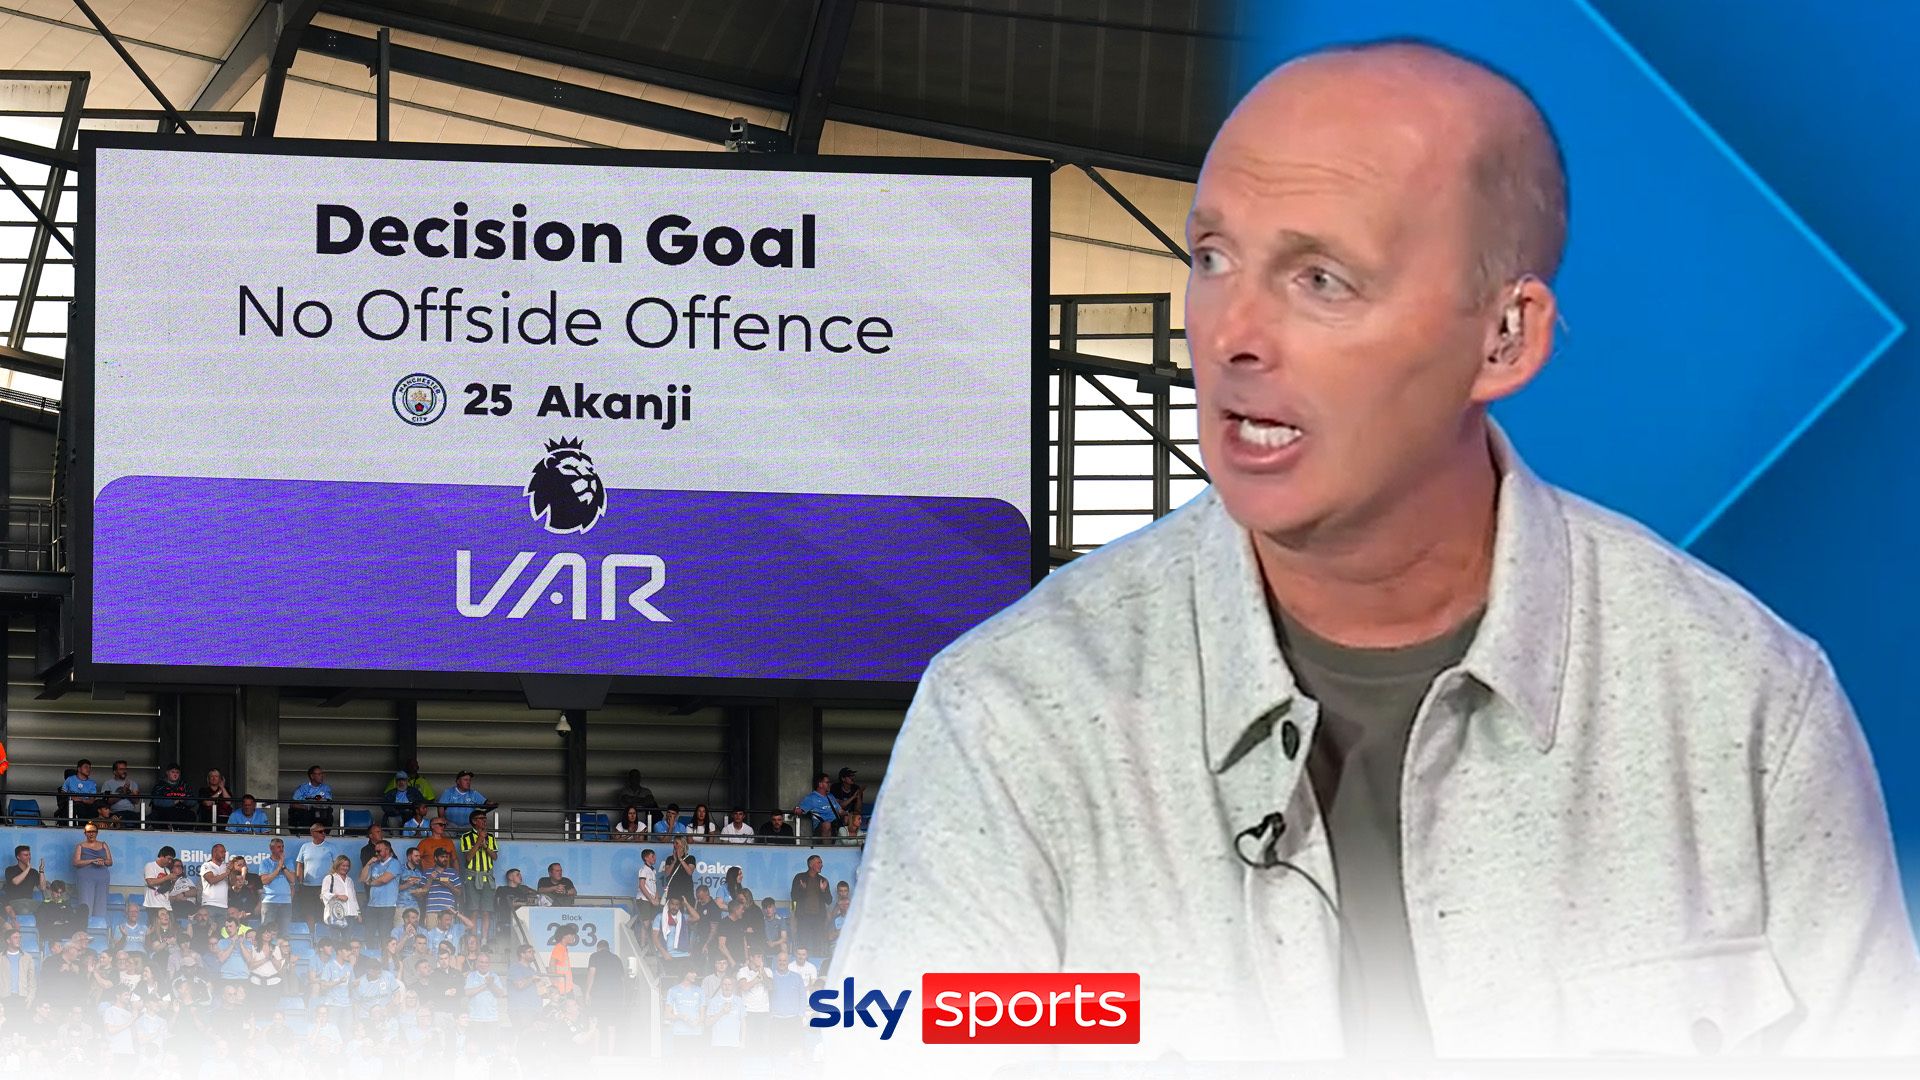 'It's a thousand per cent offside' | Dean critical of VAR after Ake goal given